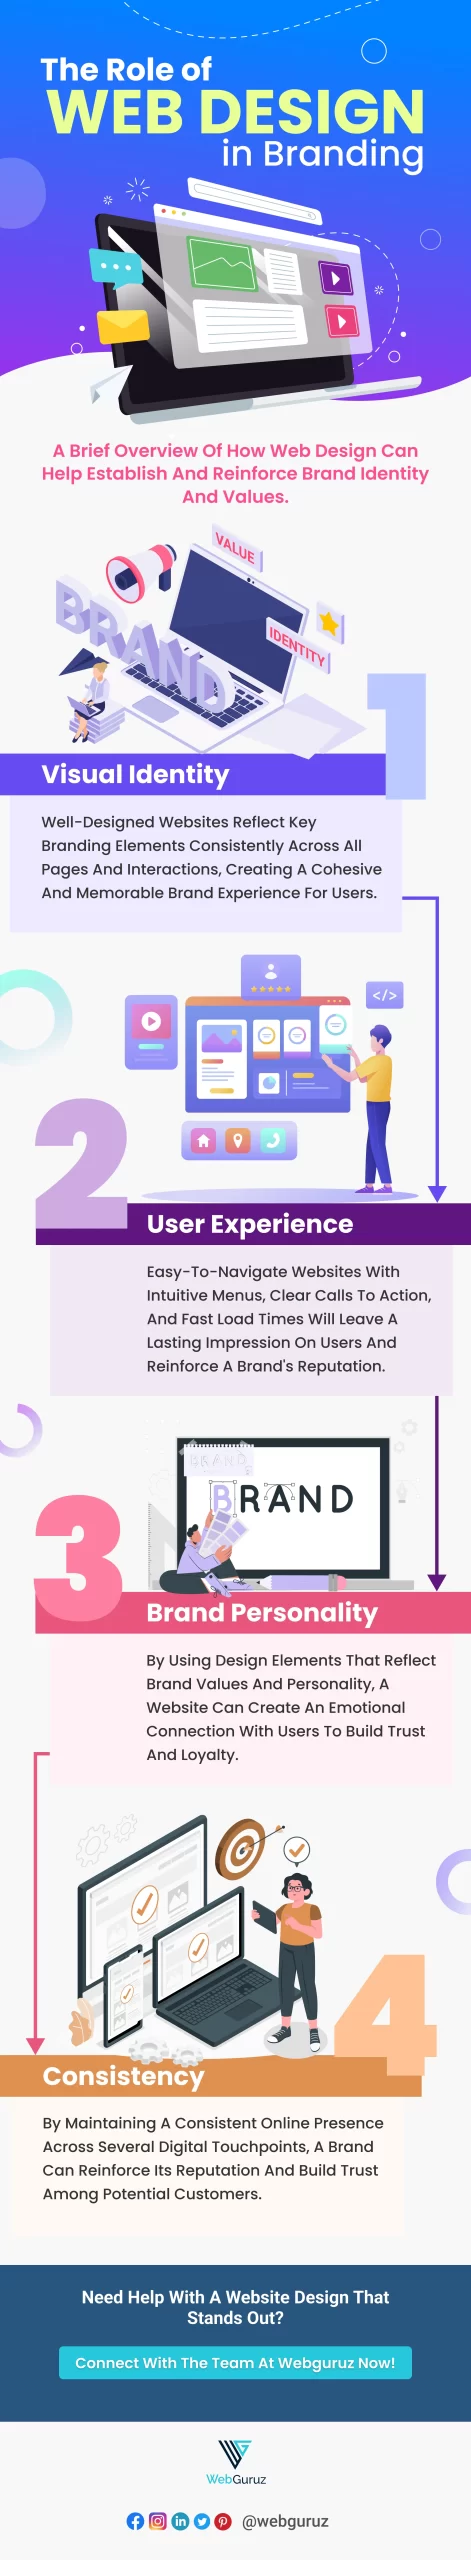 The Role of Web Design in Branding